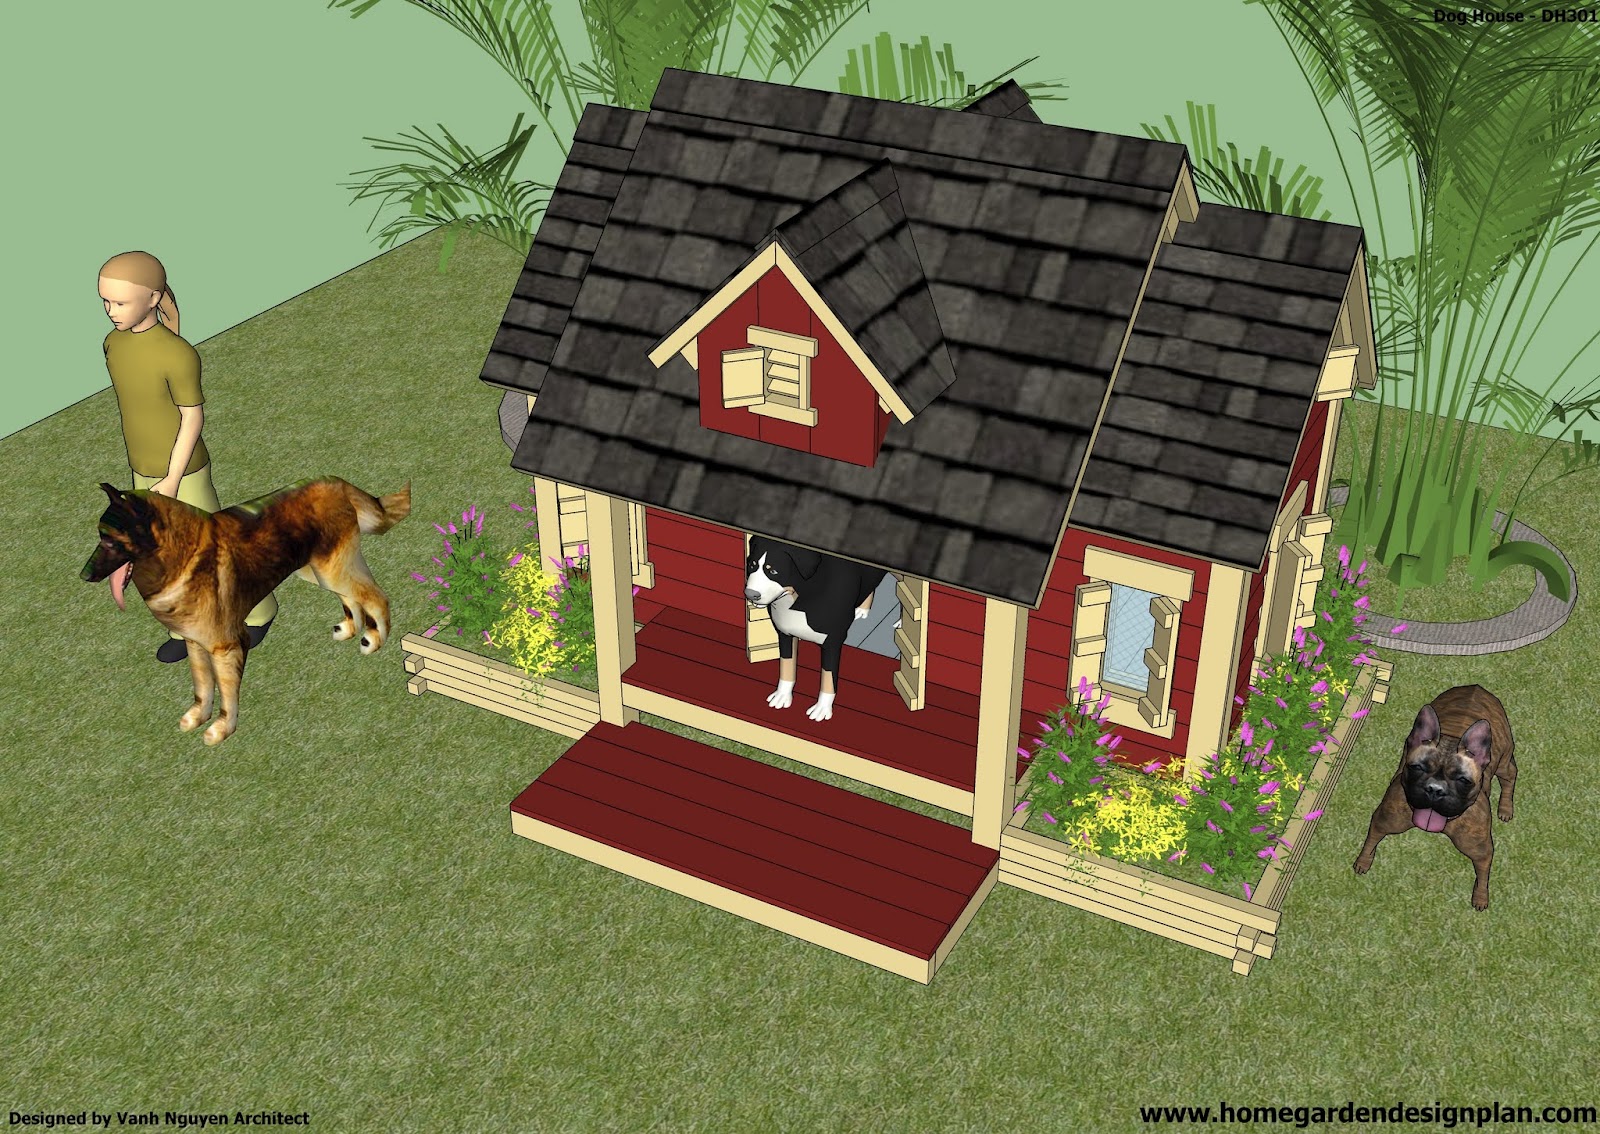 home garden plans: DH301 - Insulated Dog House Plans - Insulated Dog 